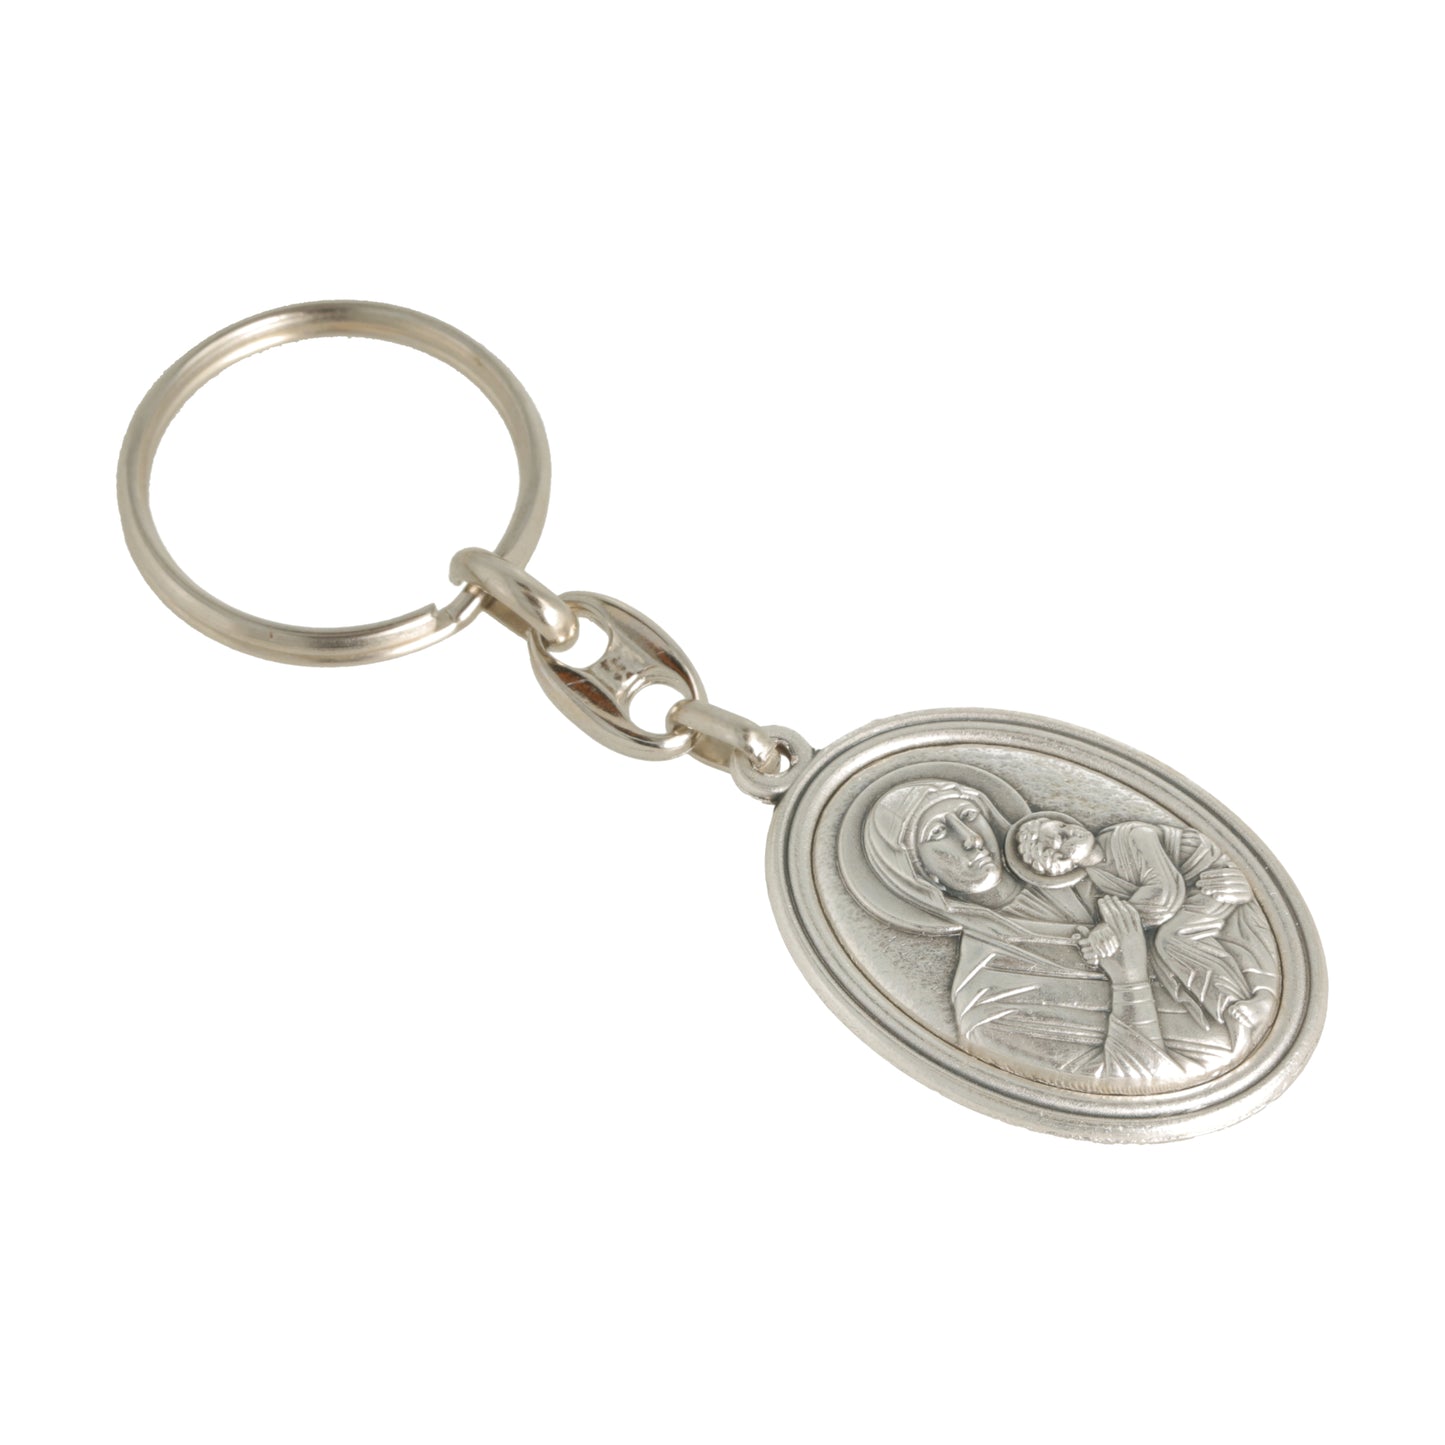 Keychain Virgin Perpetual Help Archangel Michael. Souvenirs from Italy